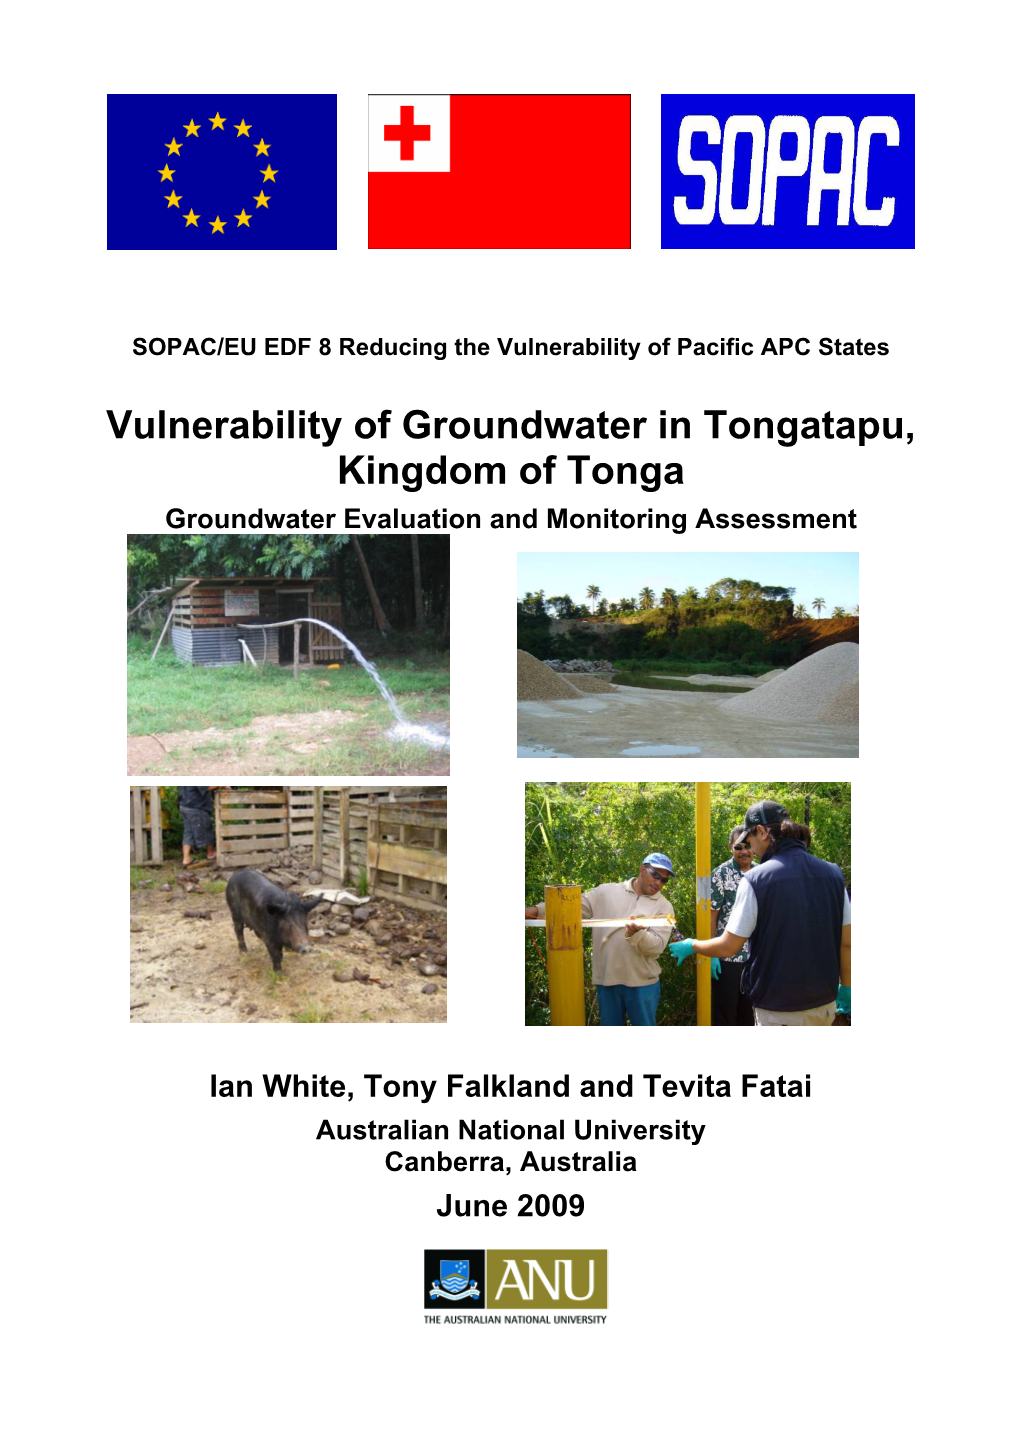 Vulnerability of Groundwater in Tongatapu, Kingdom of Tonga Groundwater Evaluation and Monitoring Assessment